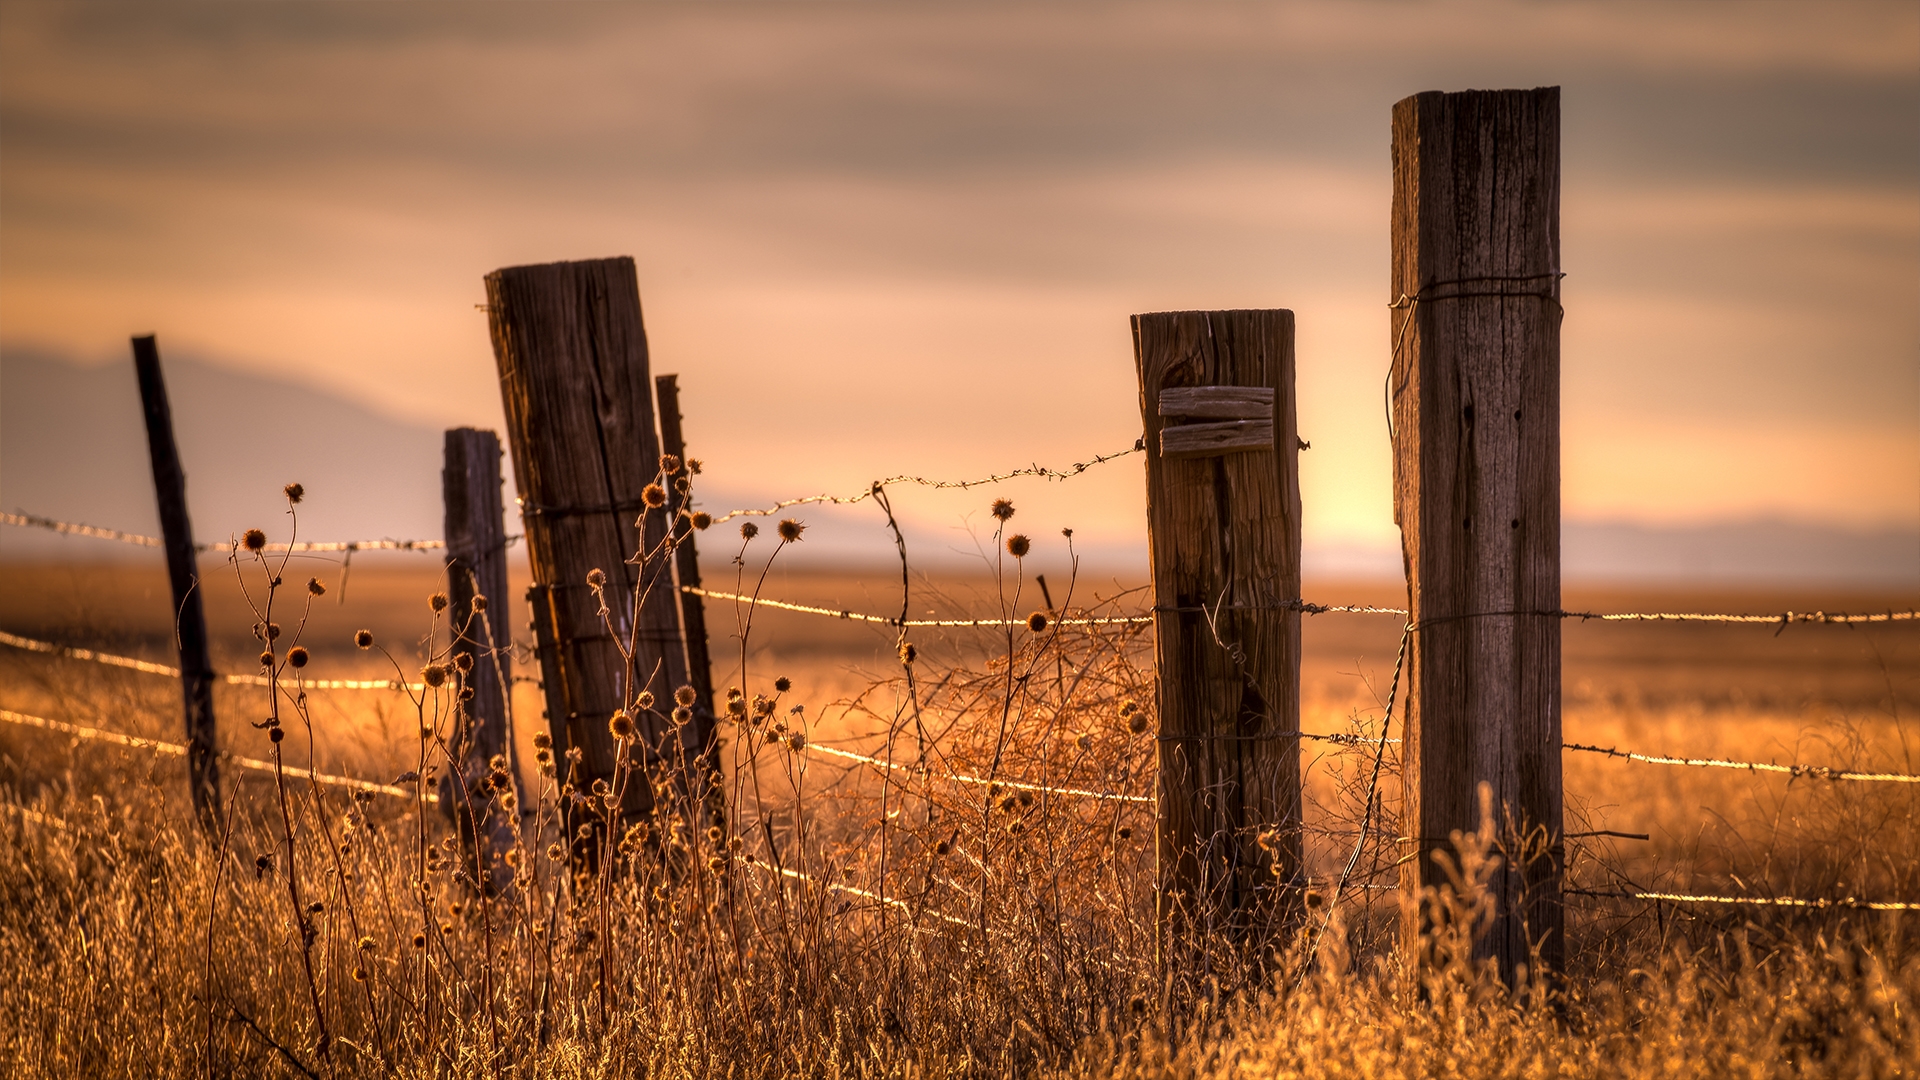 Wooden post barbed wire fence surrounding a field at sunset